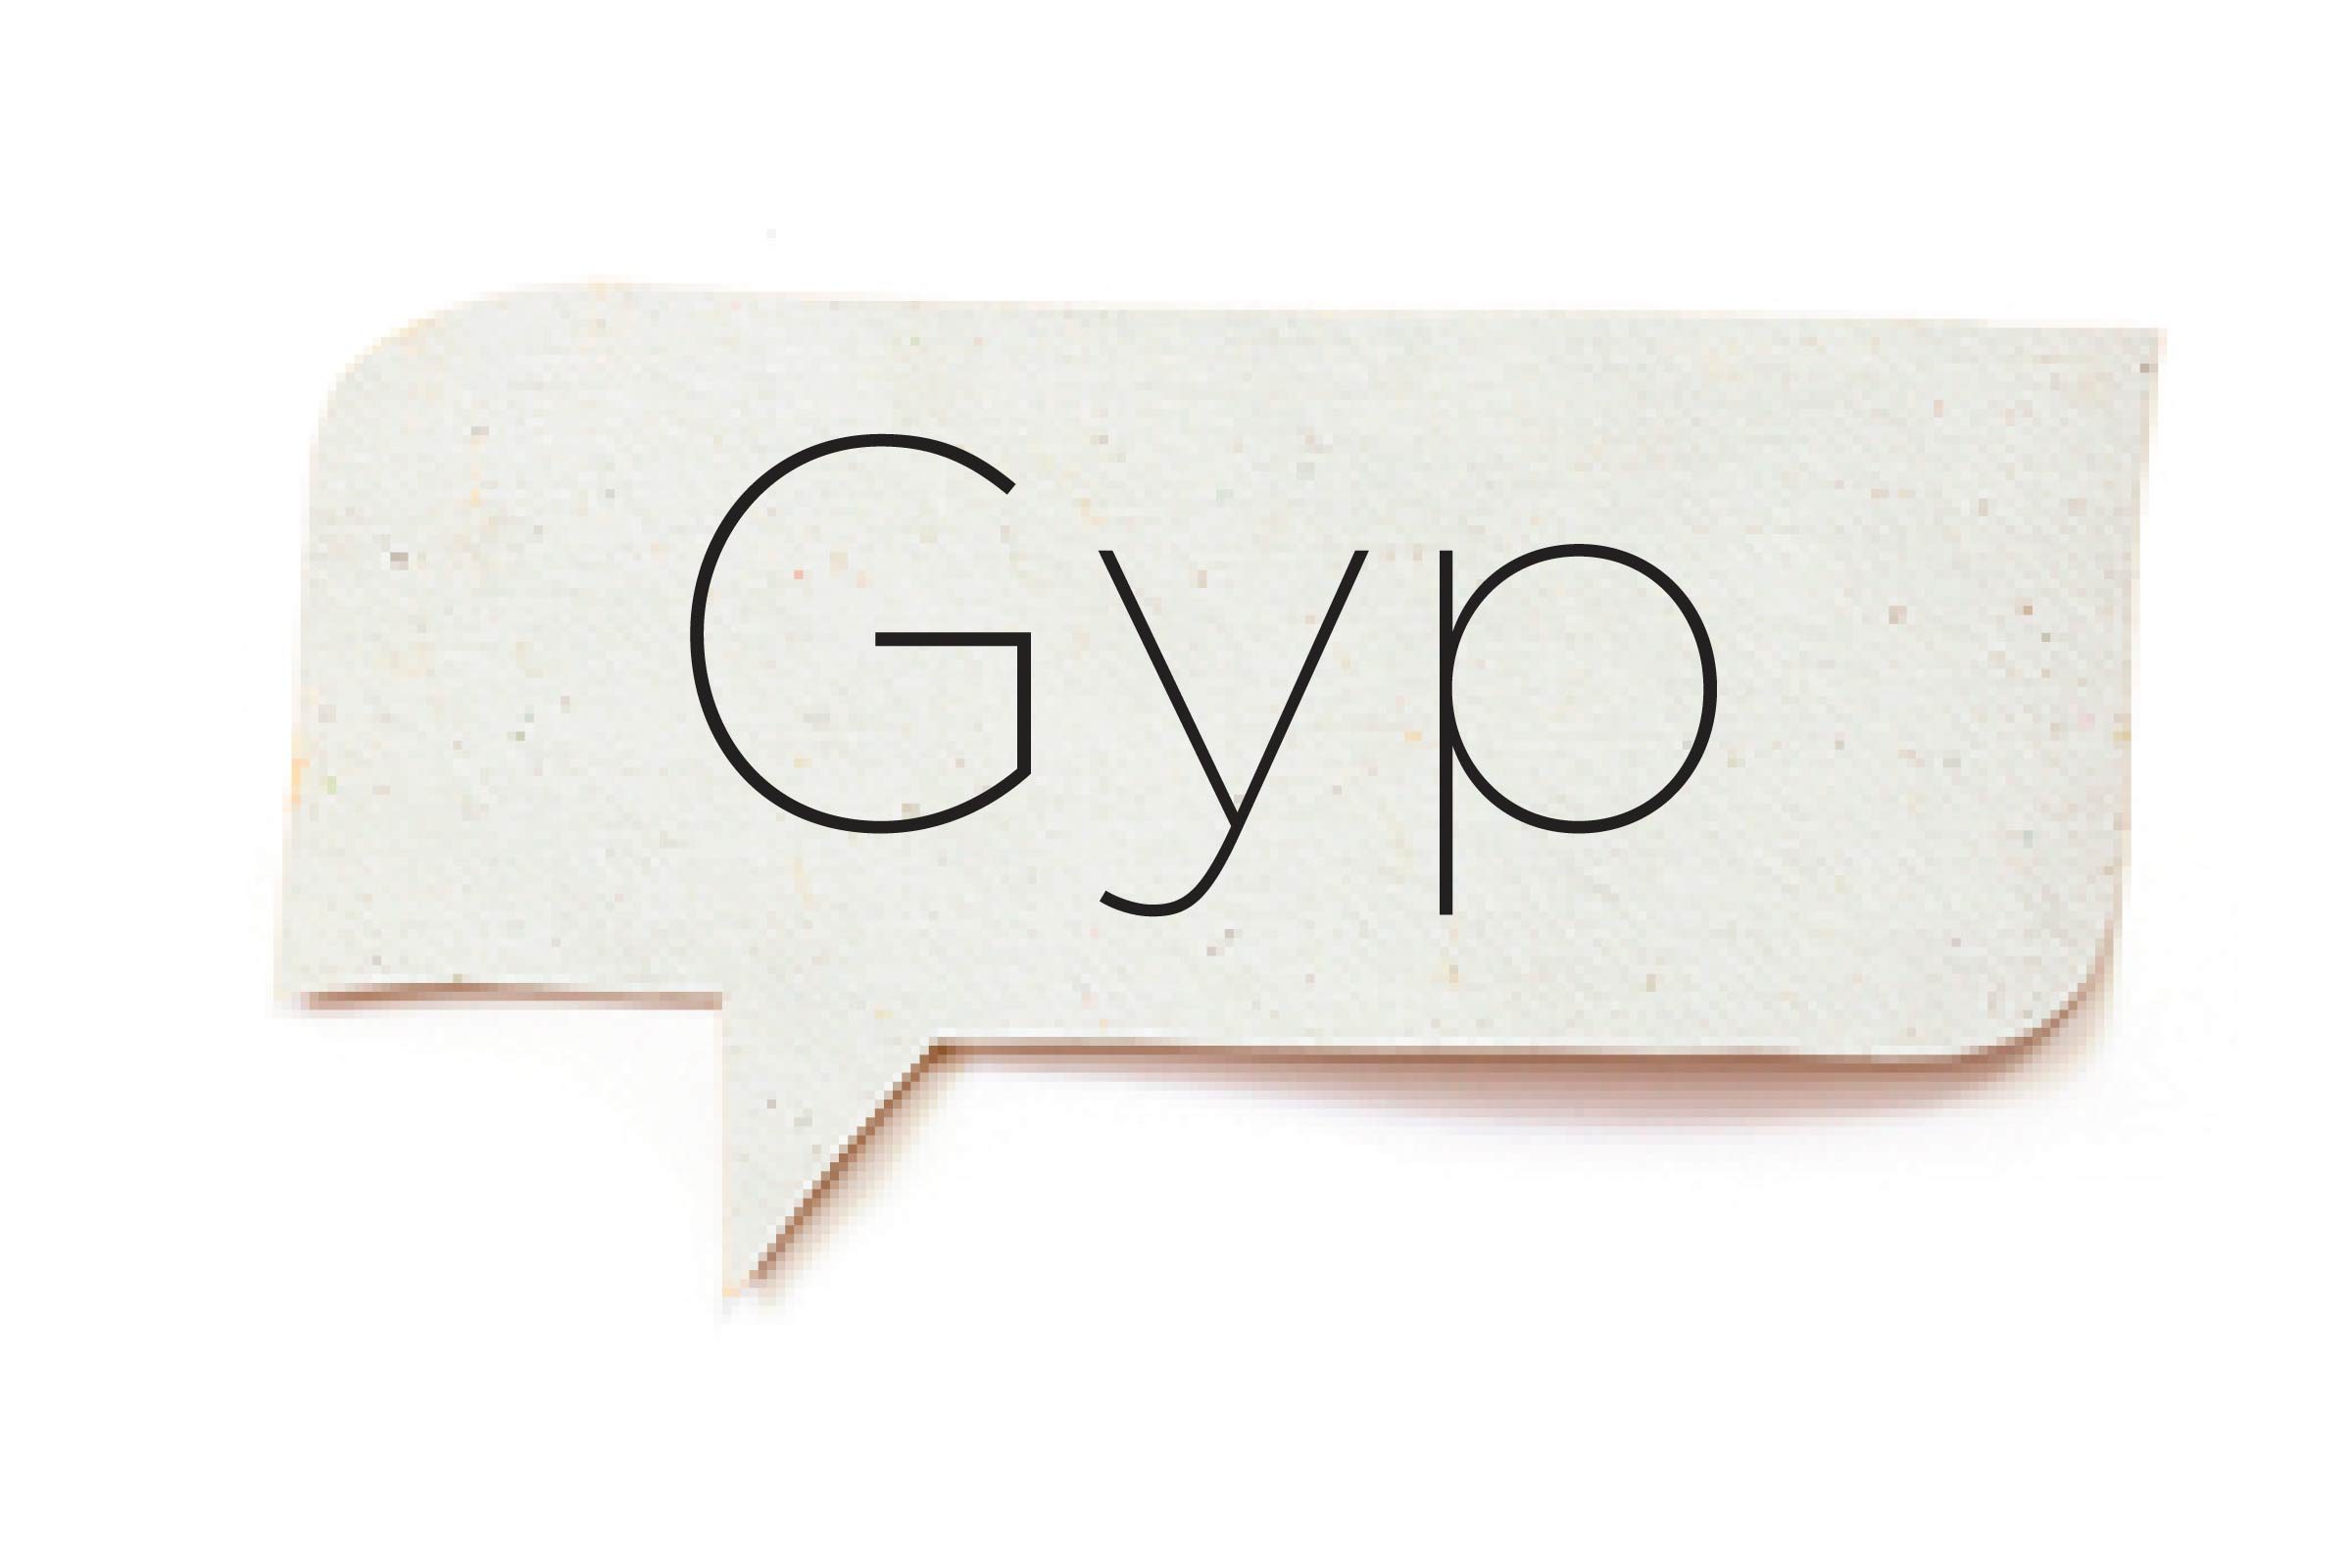 Offensive words - Gyp